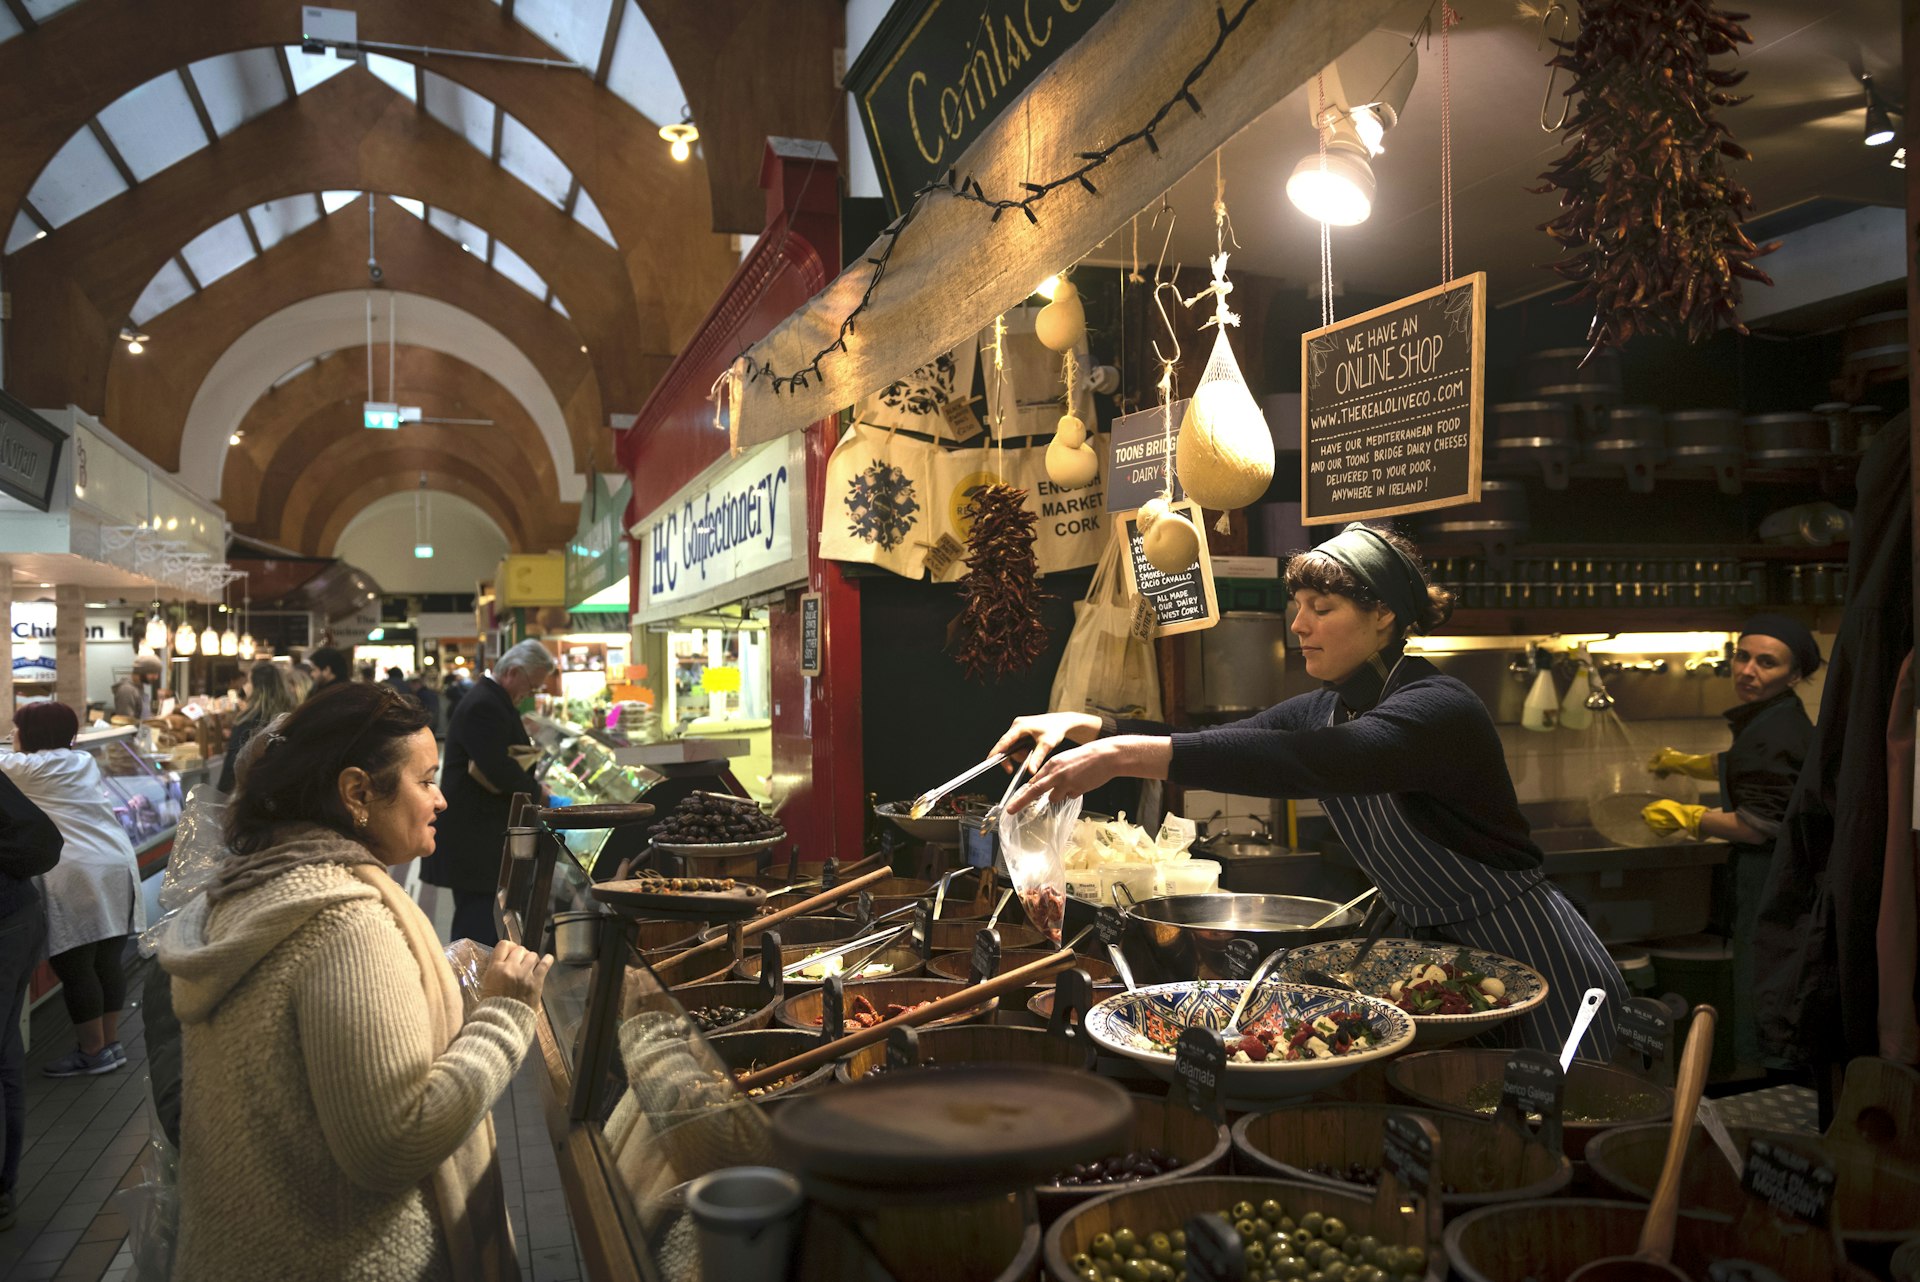 A woman serves food to a customer at the English Market, a municipal food market in the city center of Cork, Ireland. 